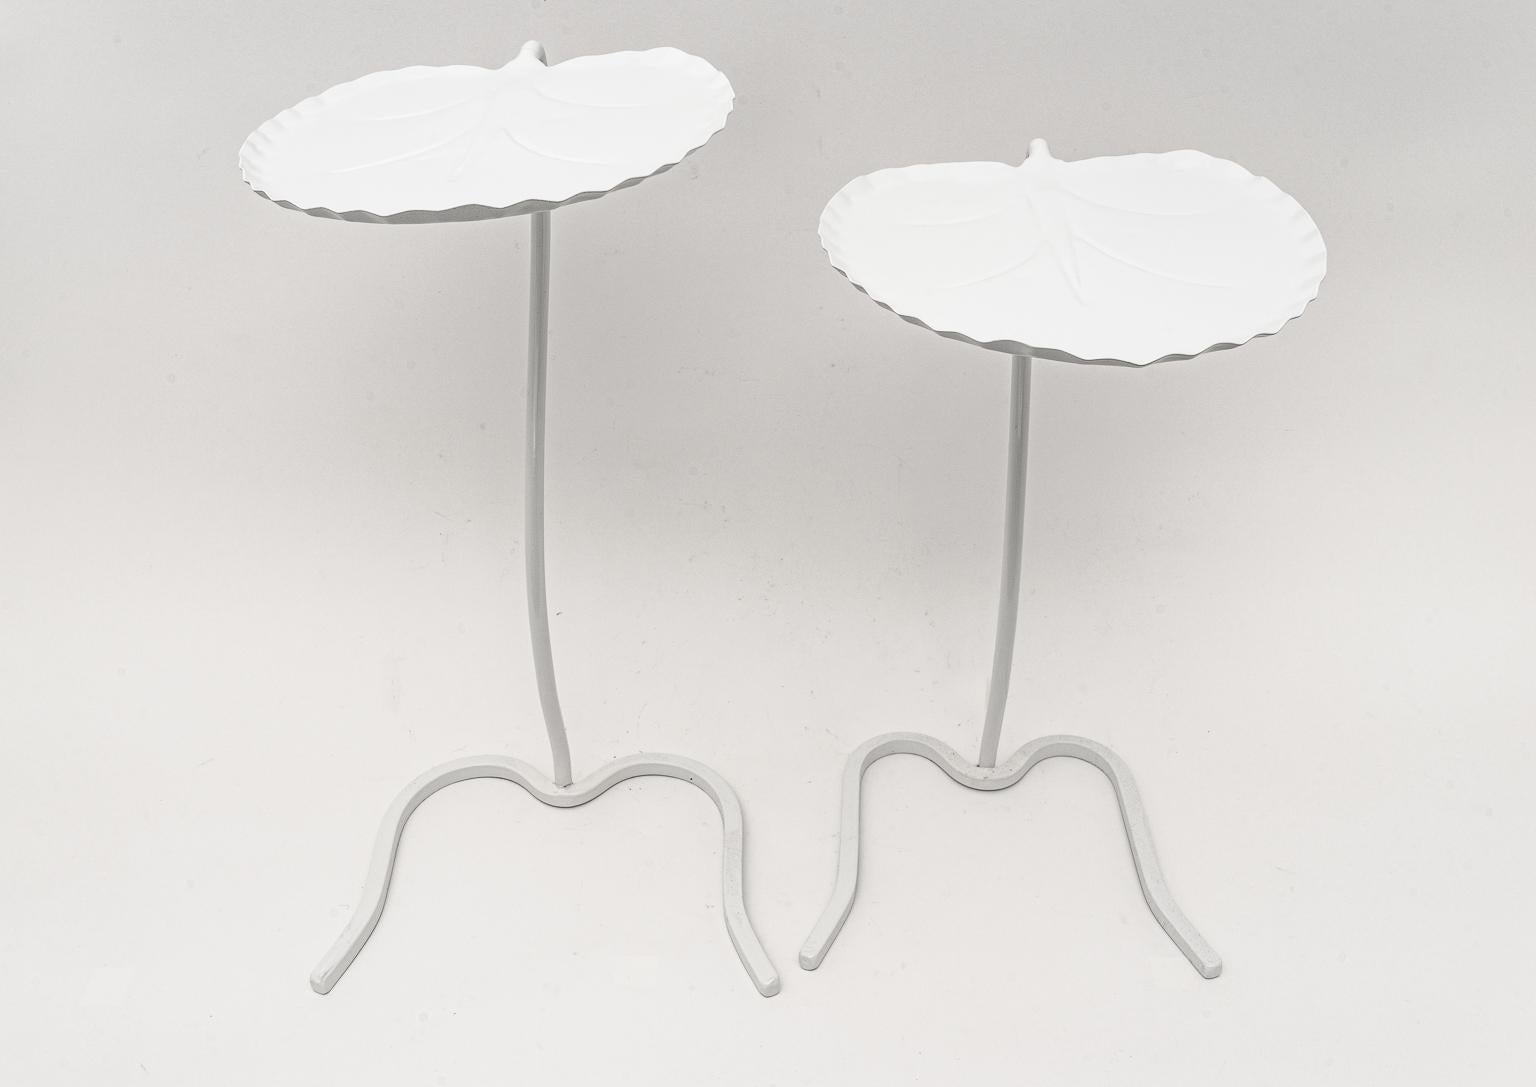 Nesting restored lily pad drinks or side tables by Salterini 1960s from a Palm Beach estate.

These have been restored and powder-coated in 